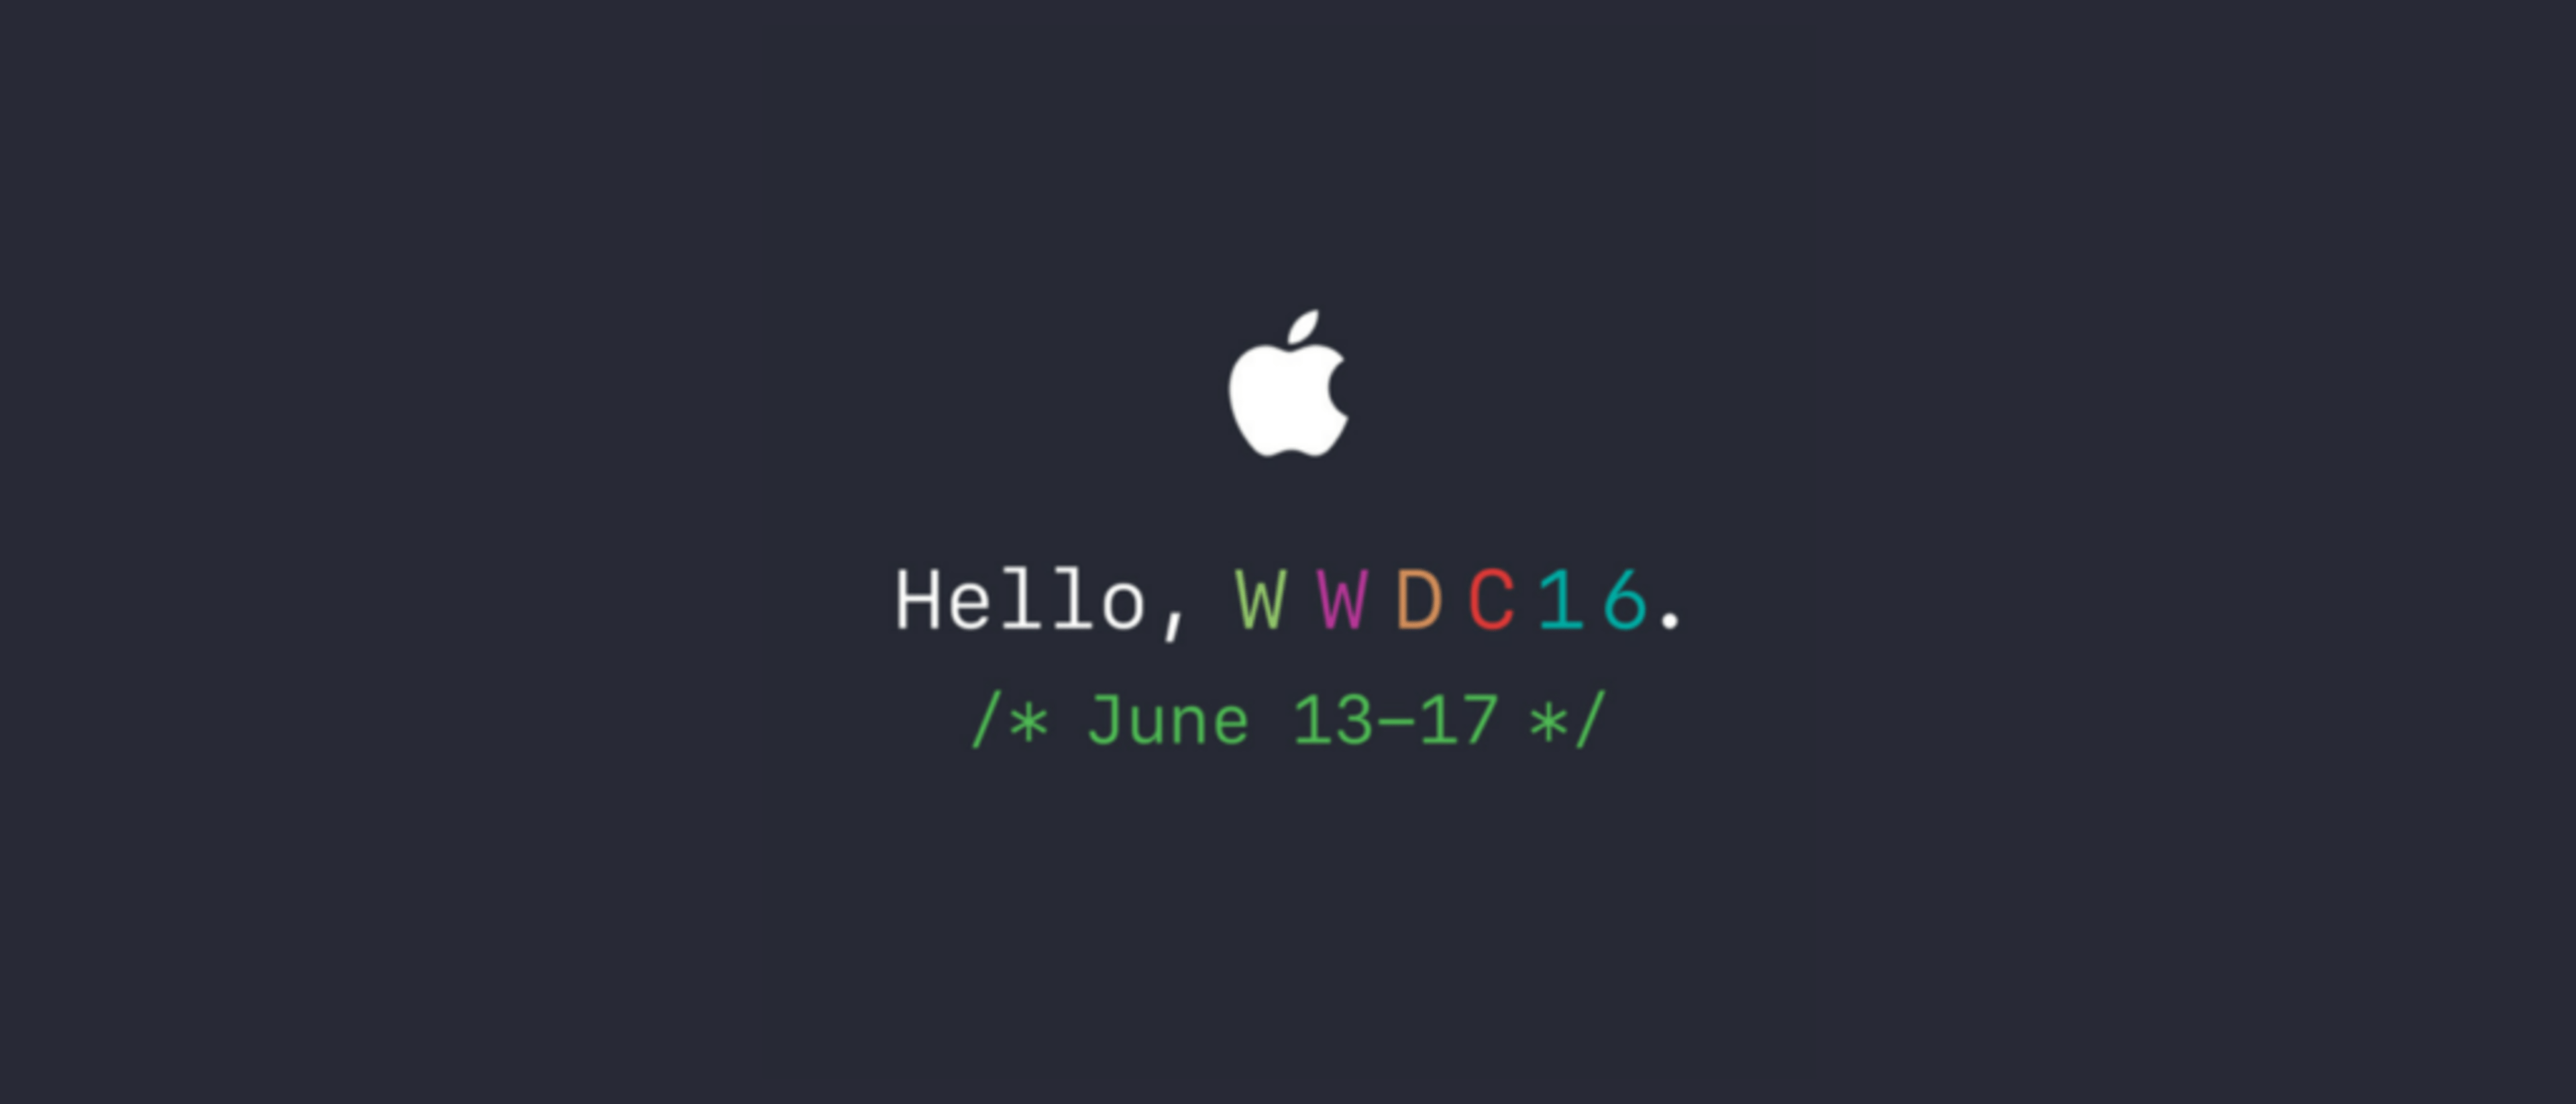 Graphical representation of Apple logo used to introduce a detailed review of 2016's WWDC conference insights.